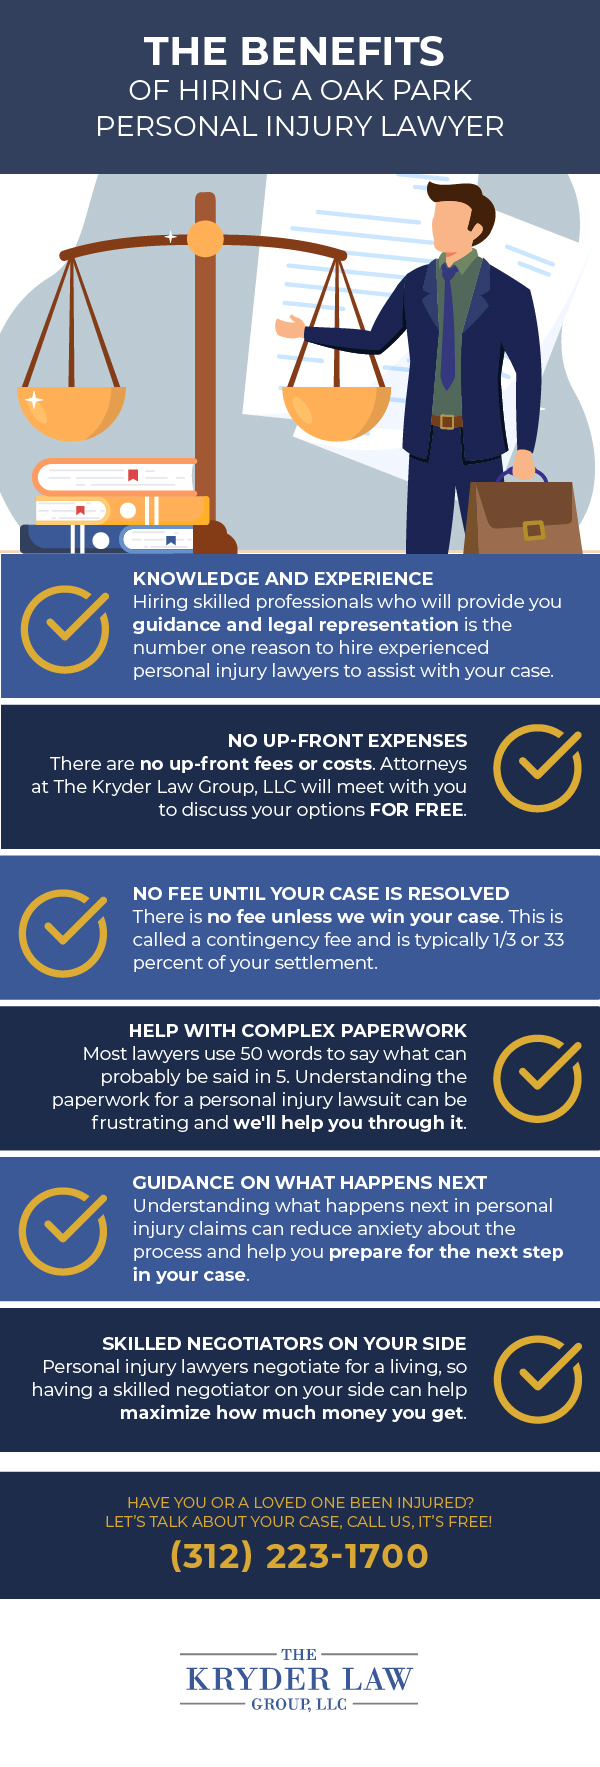 The Benefits of Hiring an Oak Park Personal Injury Lawyer Infographic